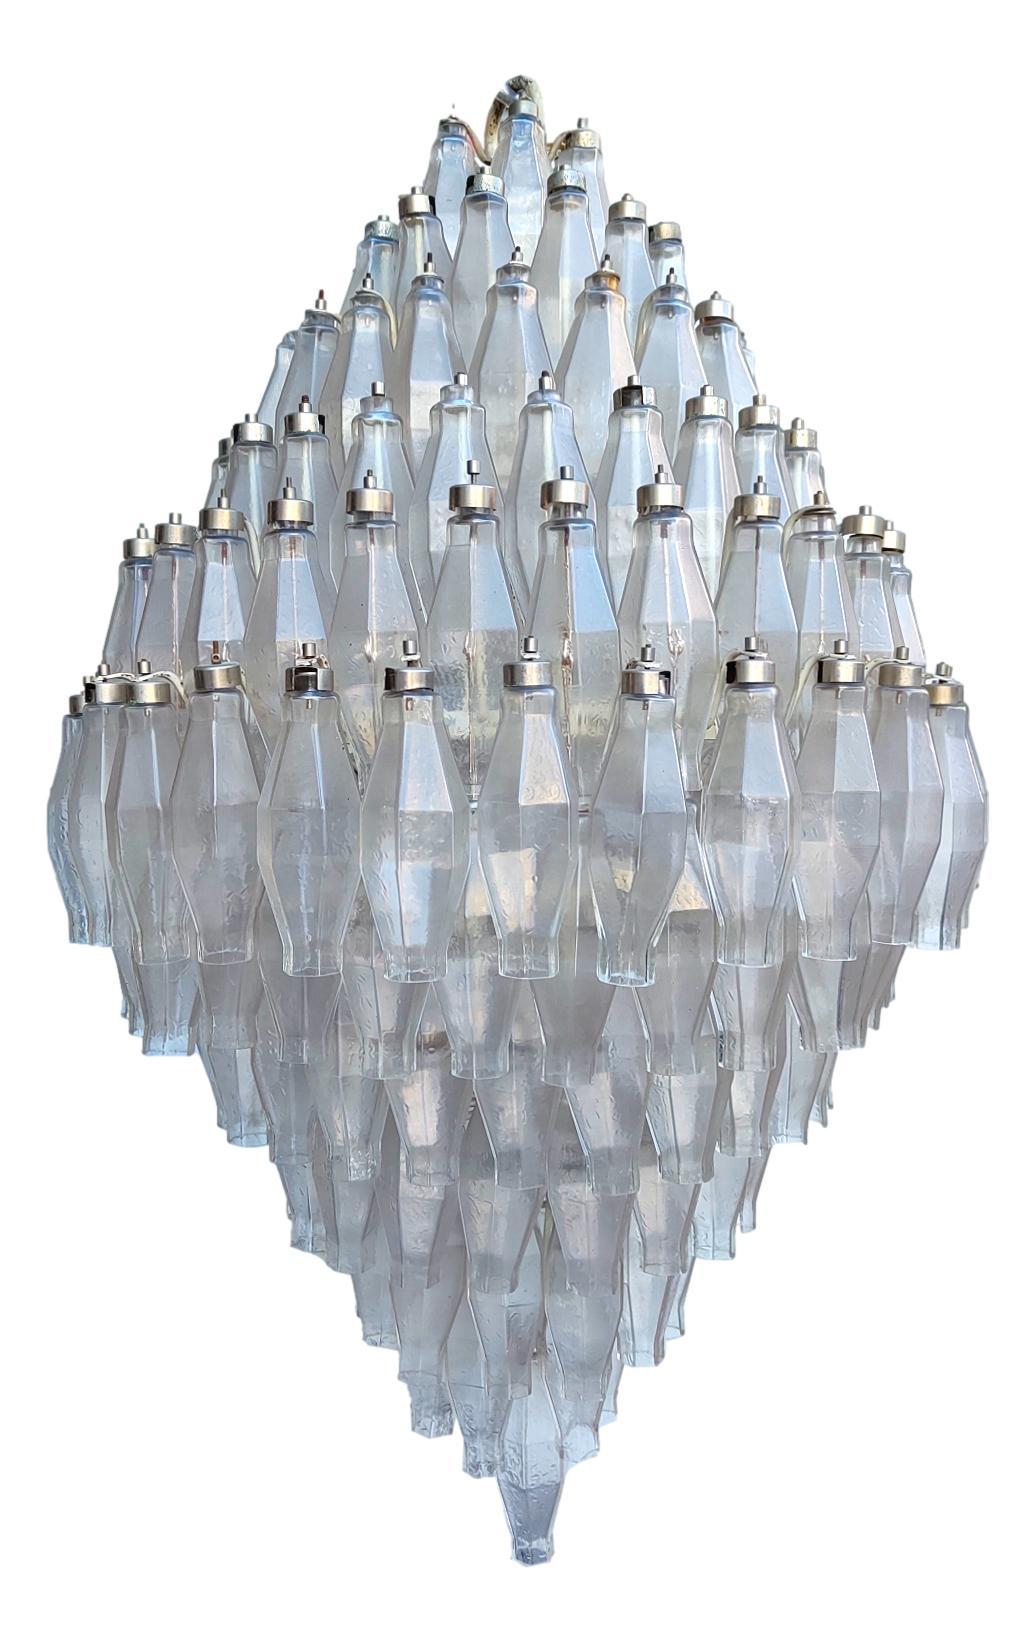 rare huge and majestic chandelier by venini, design carlo scarpa, made by 205 poliedri transparent glasses, with 19 bulb holder
height 1 meter, diameter cm 70.
no lost poliedri, only some caps, as pics
very good conditions, no broken parts
it